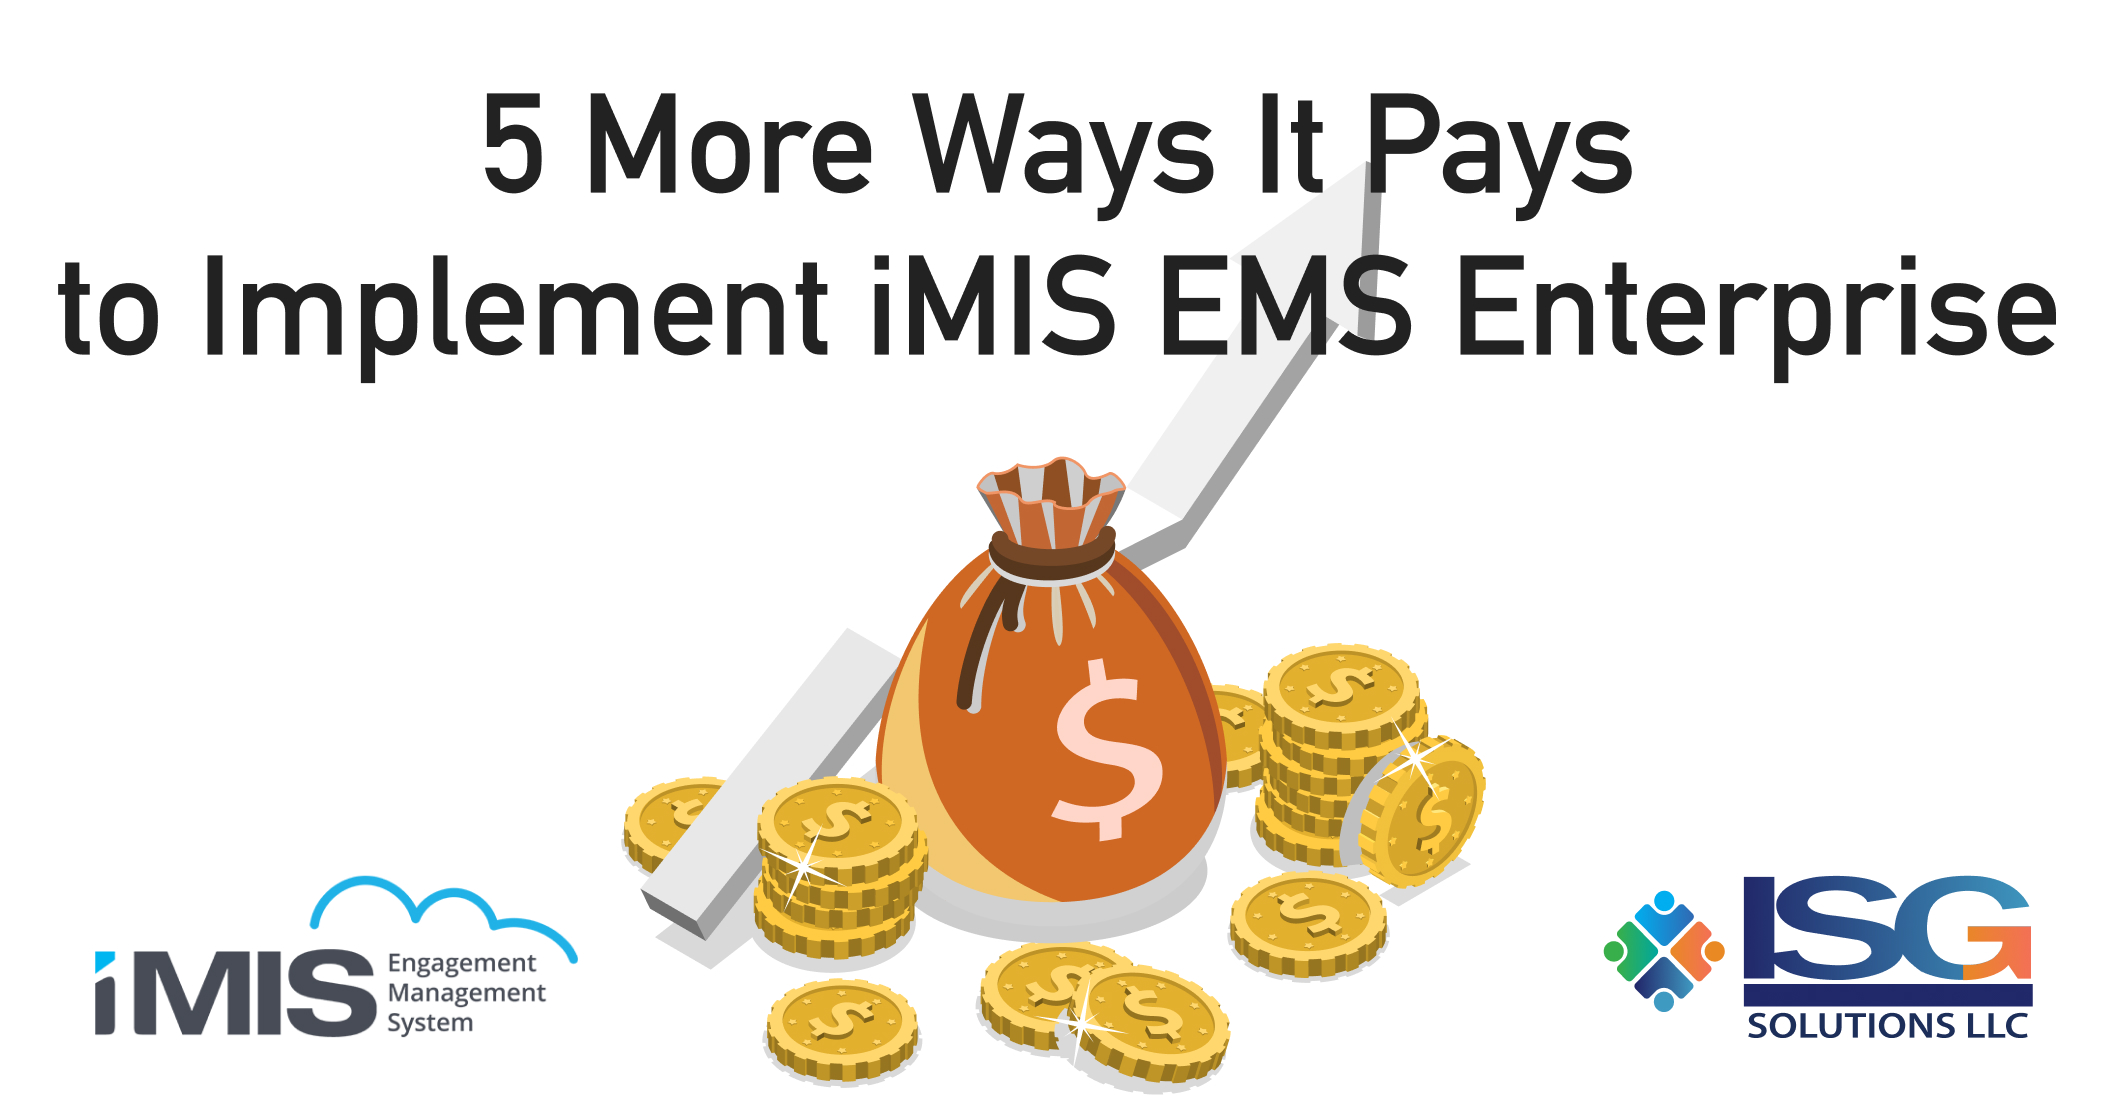 5 More Ways It Pays to Implement iMIS EMS Enterprise